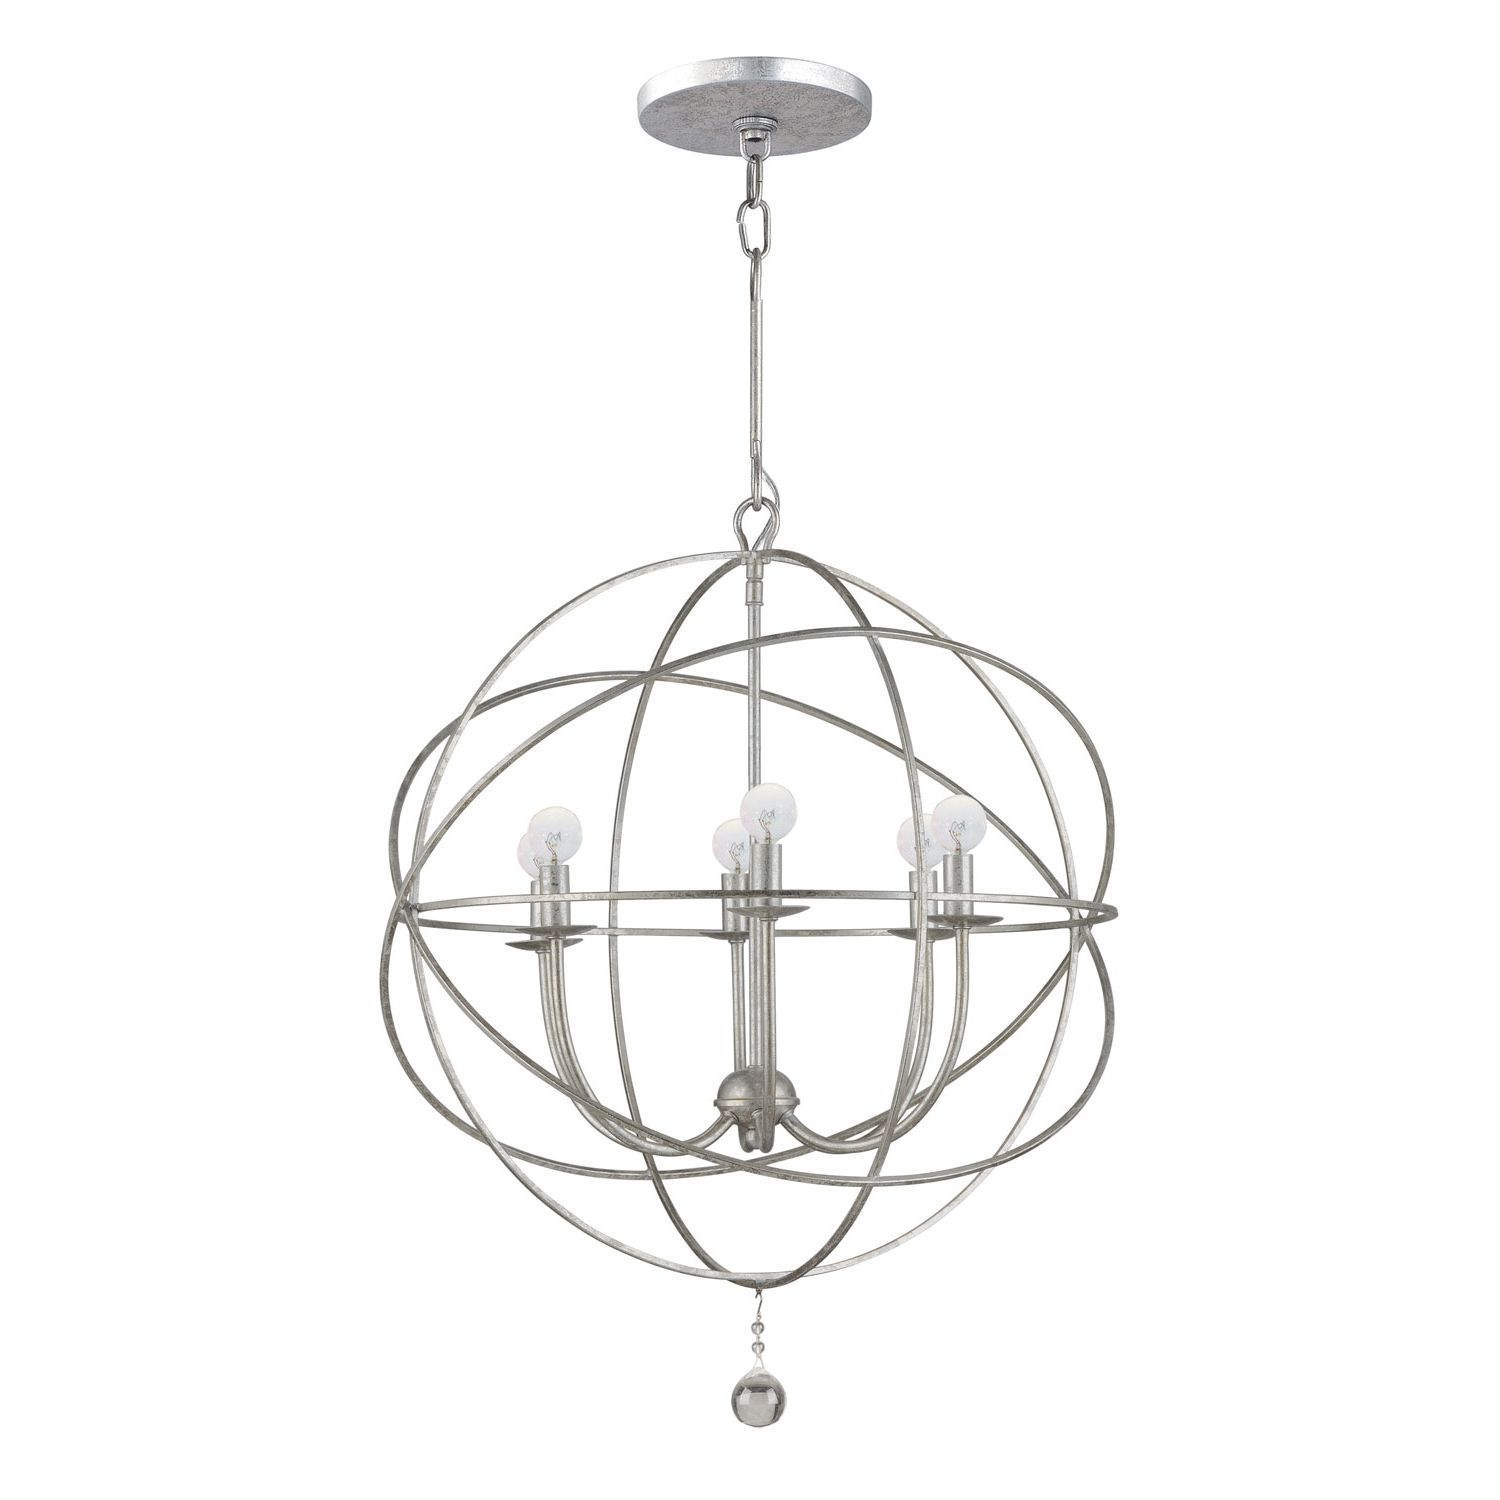 Famous Crystorama Lighting Group Solaris Olde Silver Six Light Chandelier Within Silver Chandeliers (View 1 of 20)